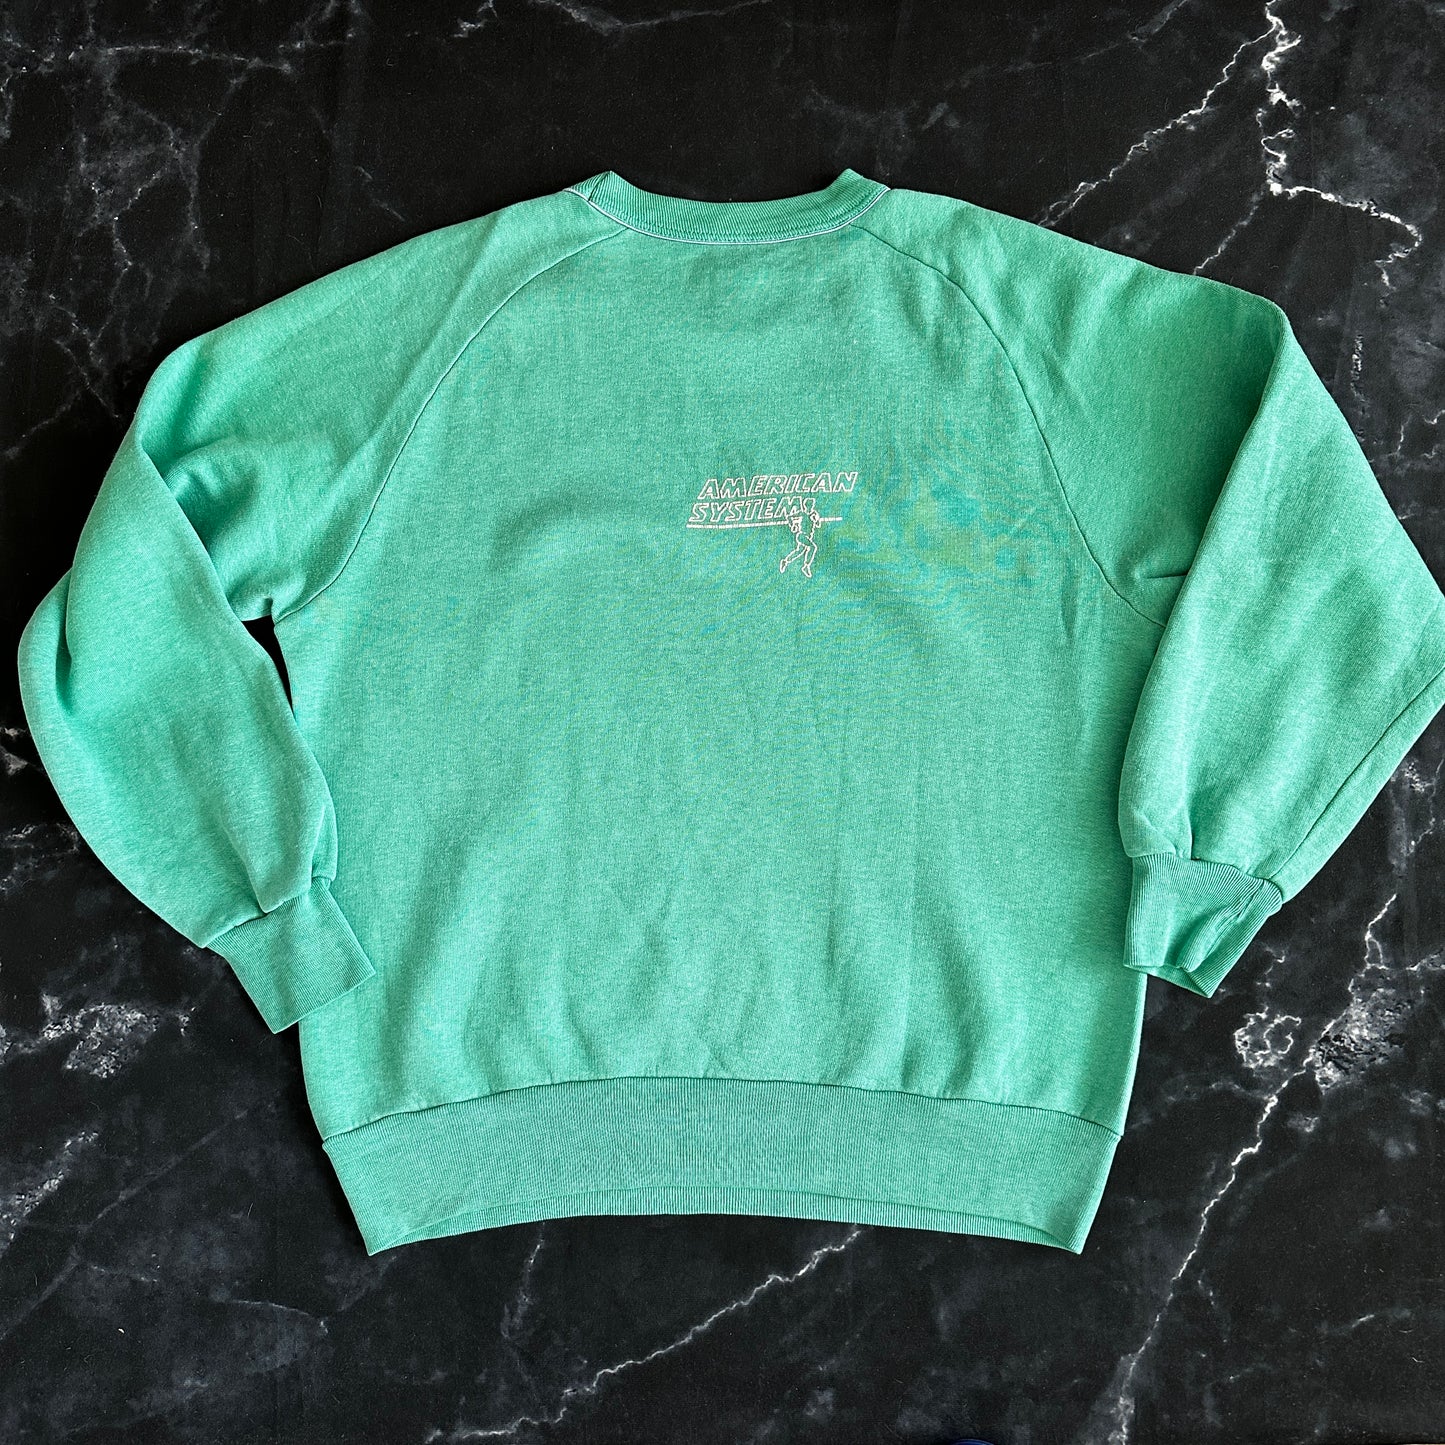 American System 80s Vintage Sweatshirt- L - Made in Italy